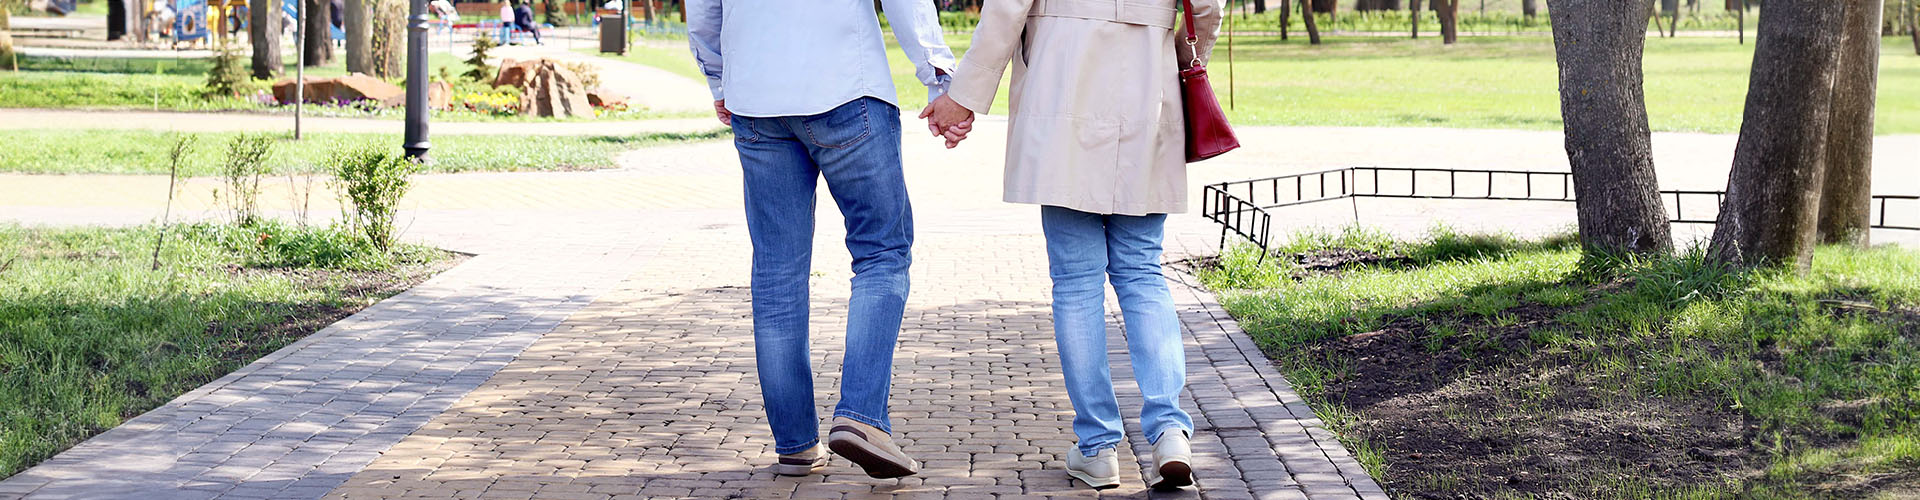 mature couple walking in park on spring day